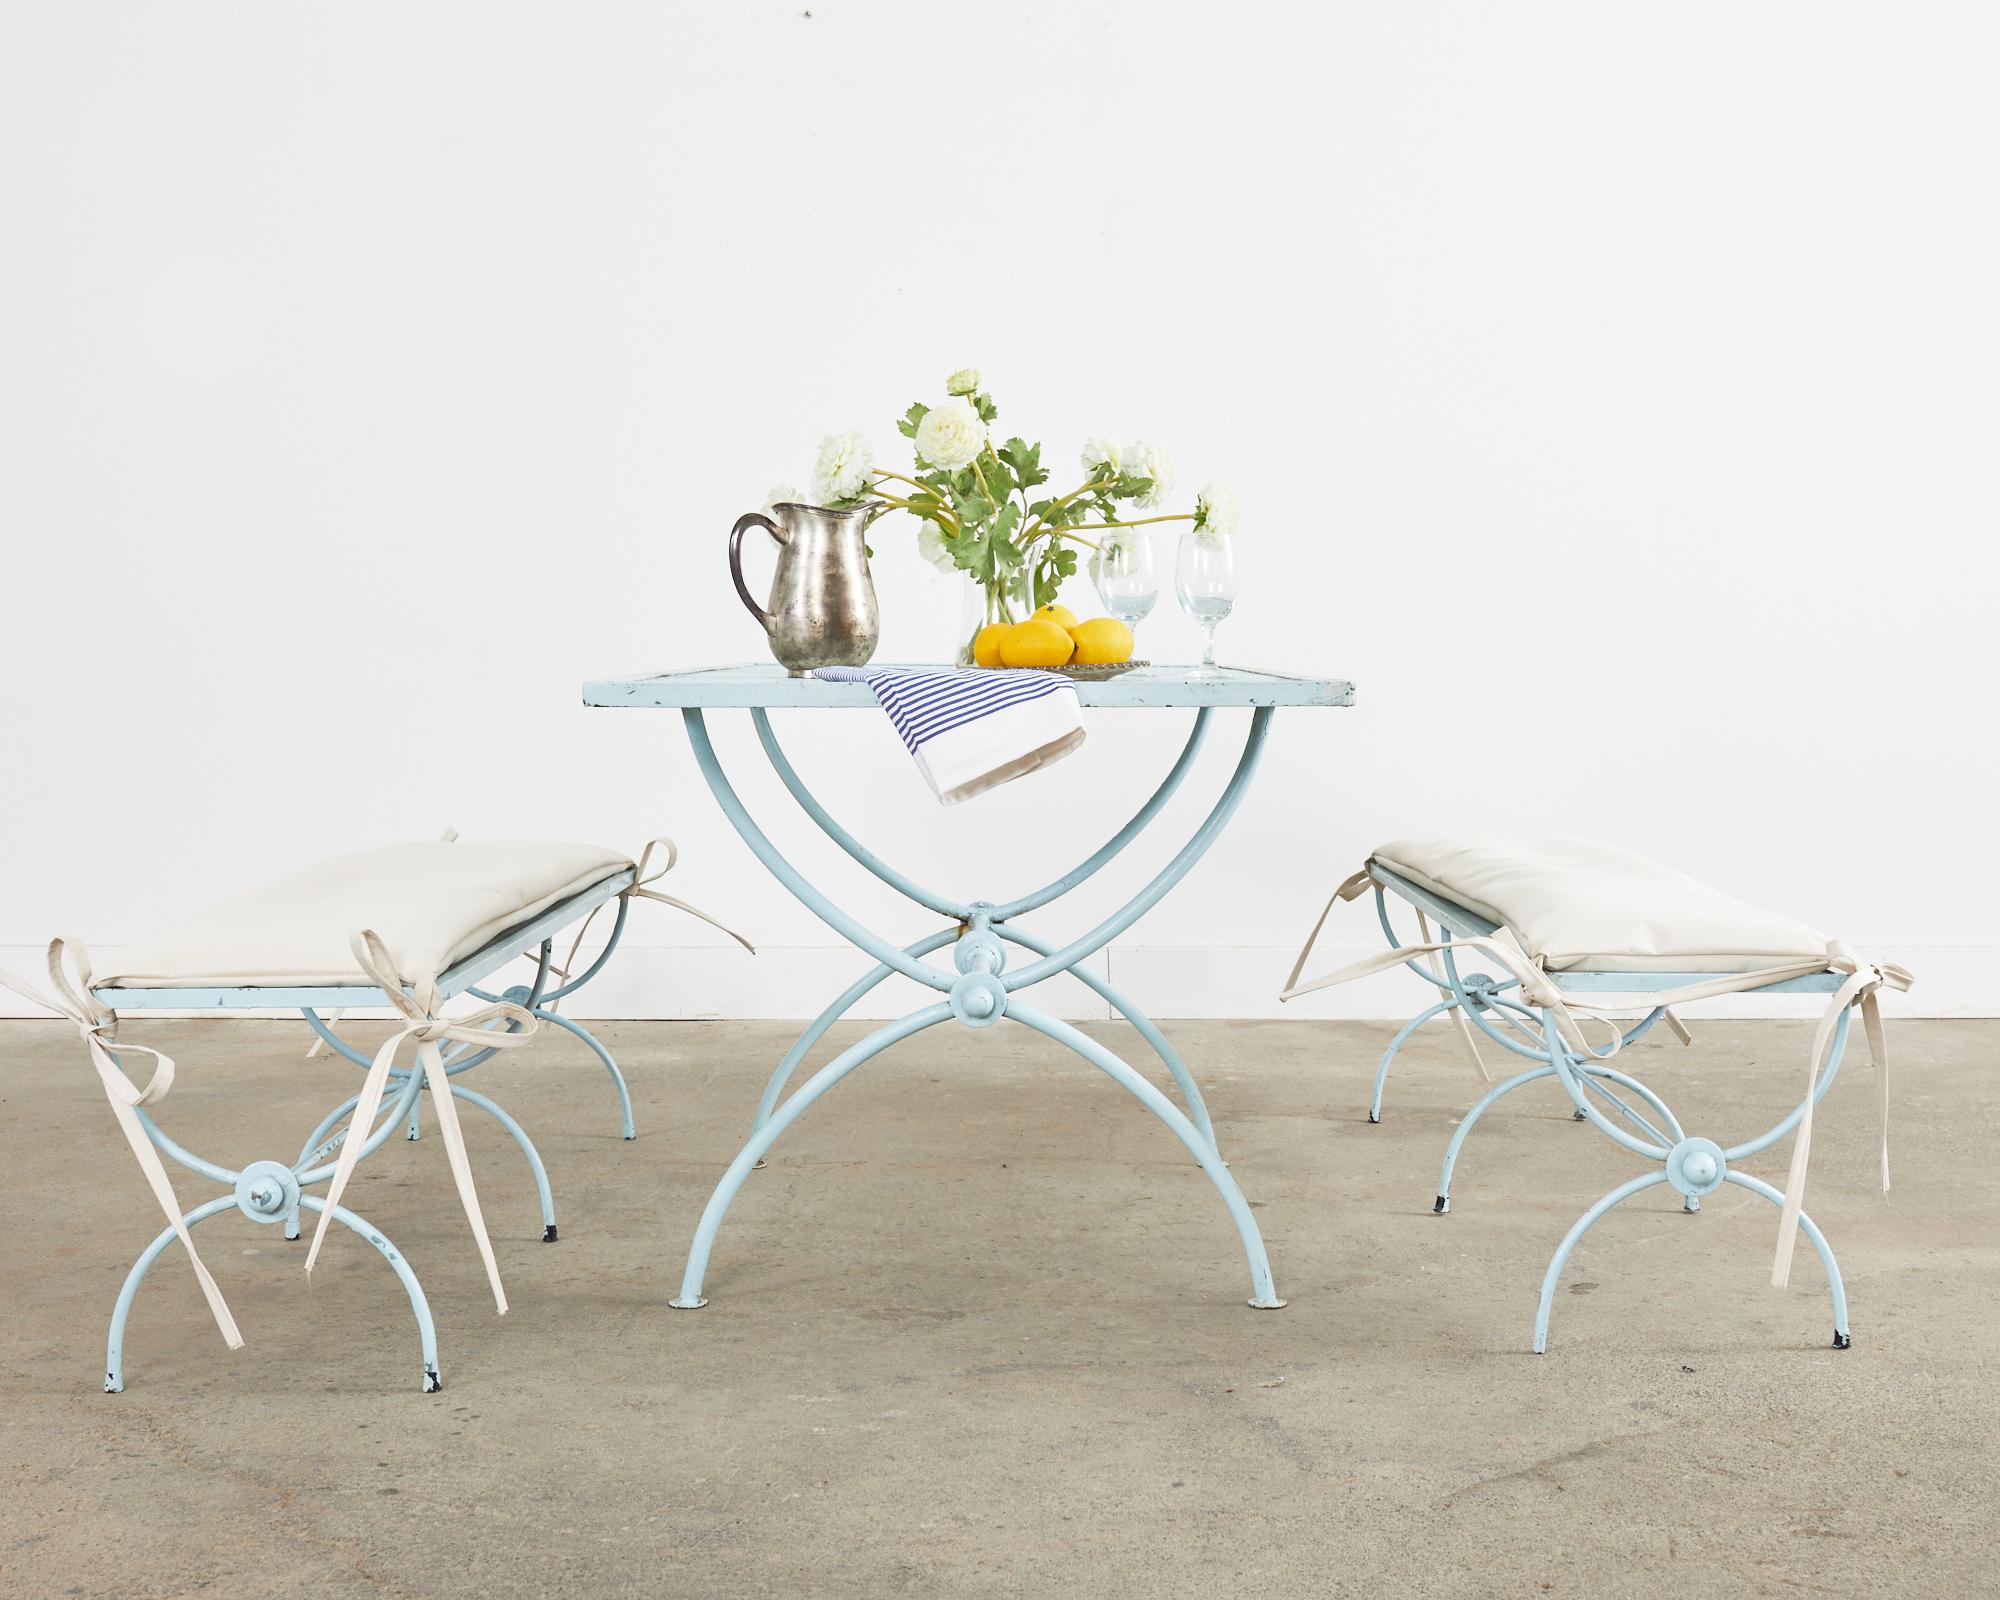 Mid-Century Modern painted iron patio and garden table featuring neoclassical style Curule legs. The top of the rectangular garden table has a mesh inset in a geometric pattern. The table is supported by a trestle-style base with gracefully curved